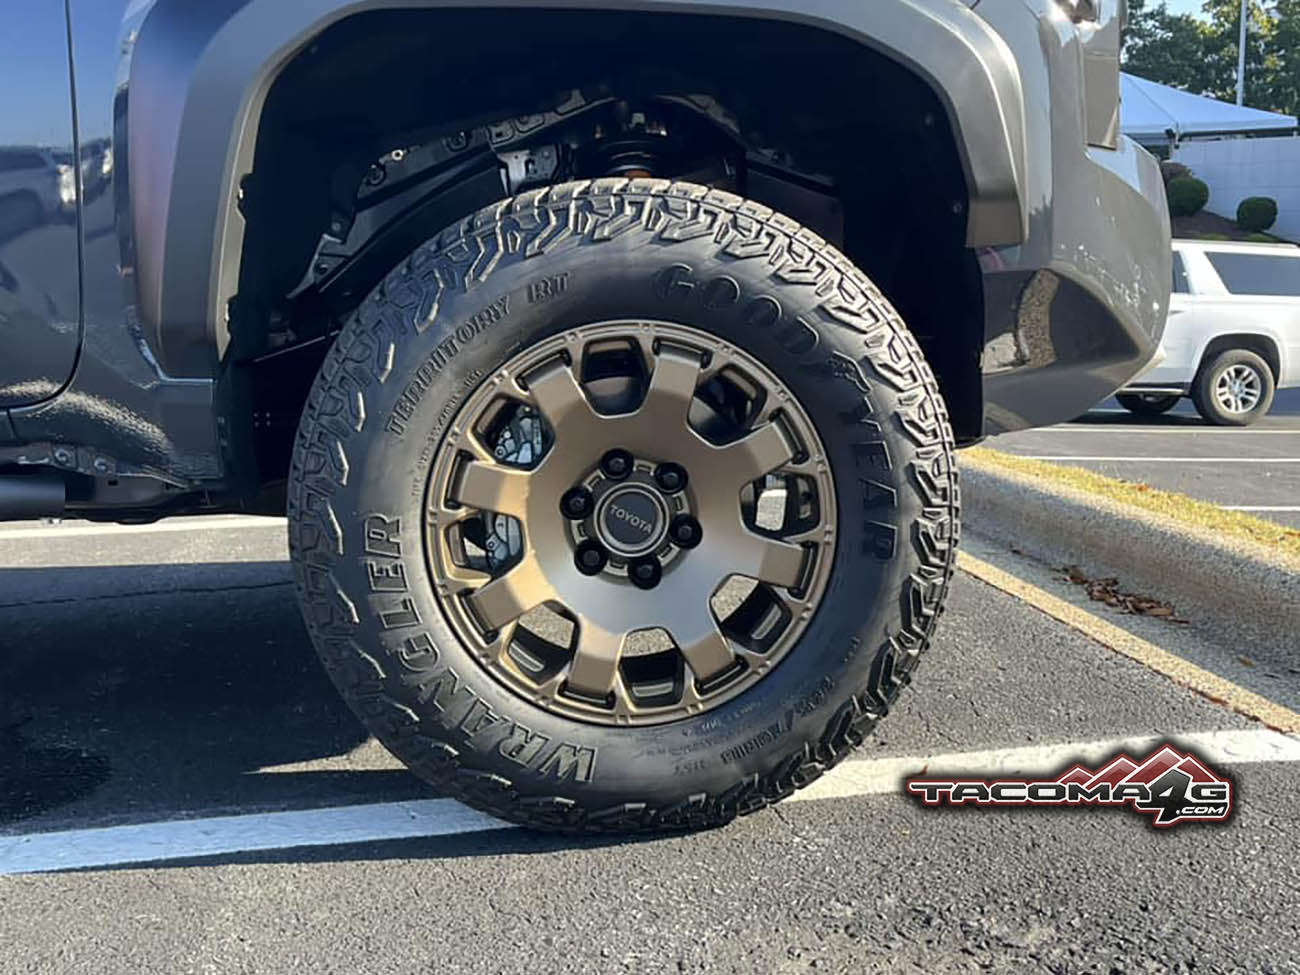 2024 Tacoma Underground TRD PRO vs. TRAILHUNTER 2024 Tacomas side-by-side comparison 385846890_122135840360010156_6488290636813403005_n